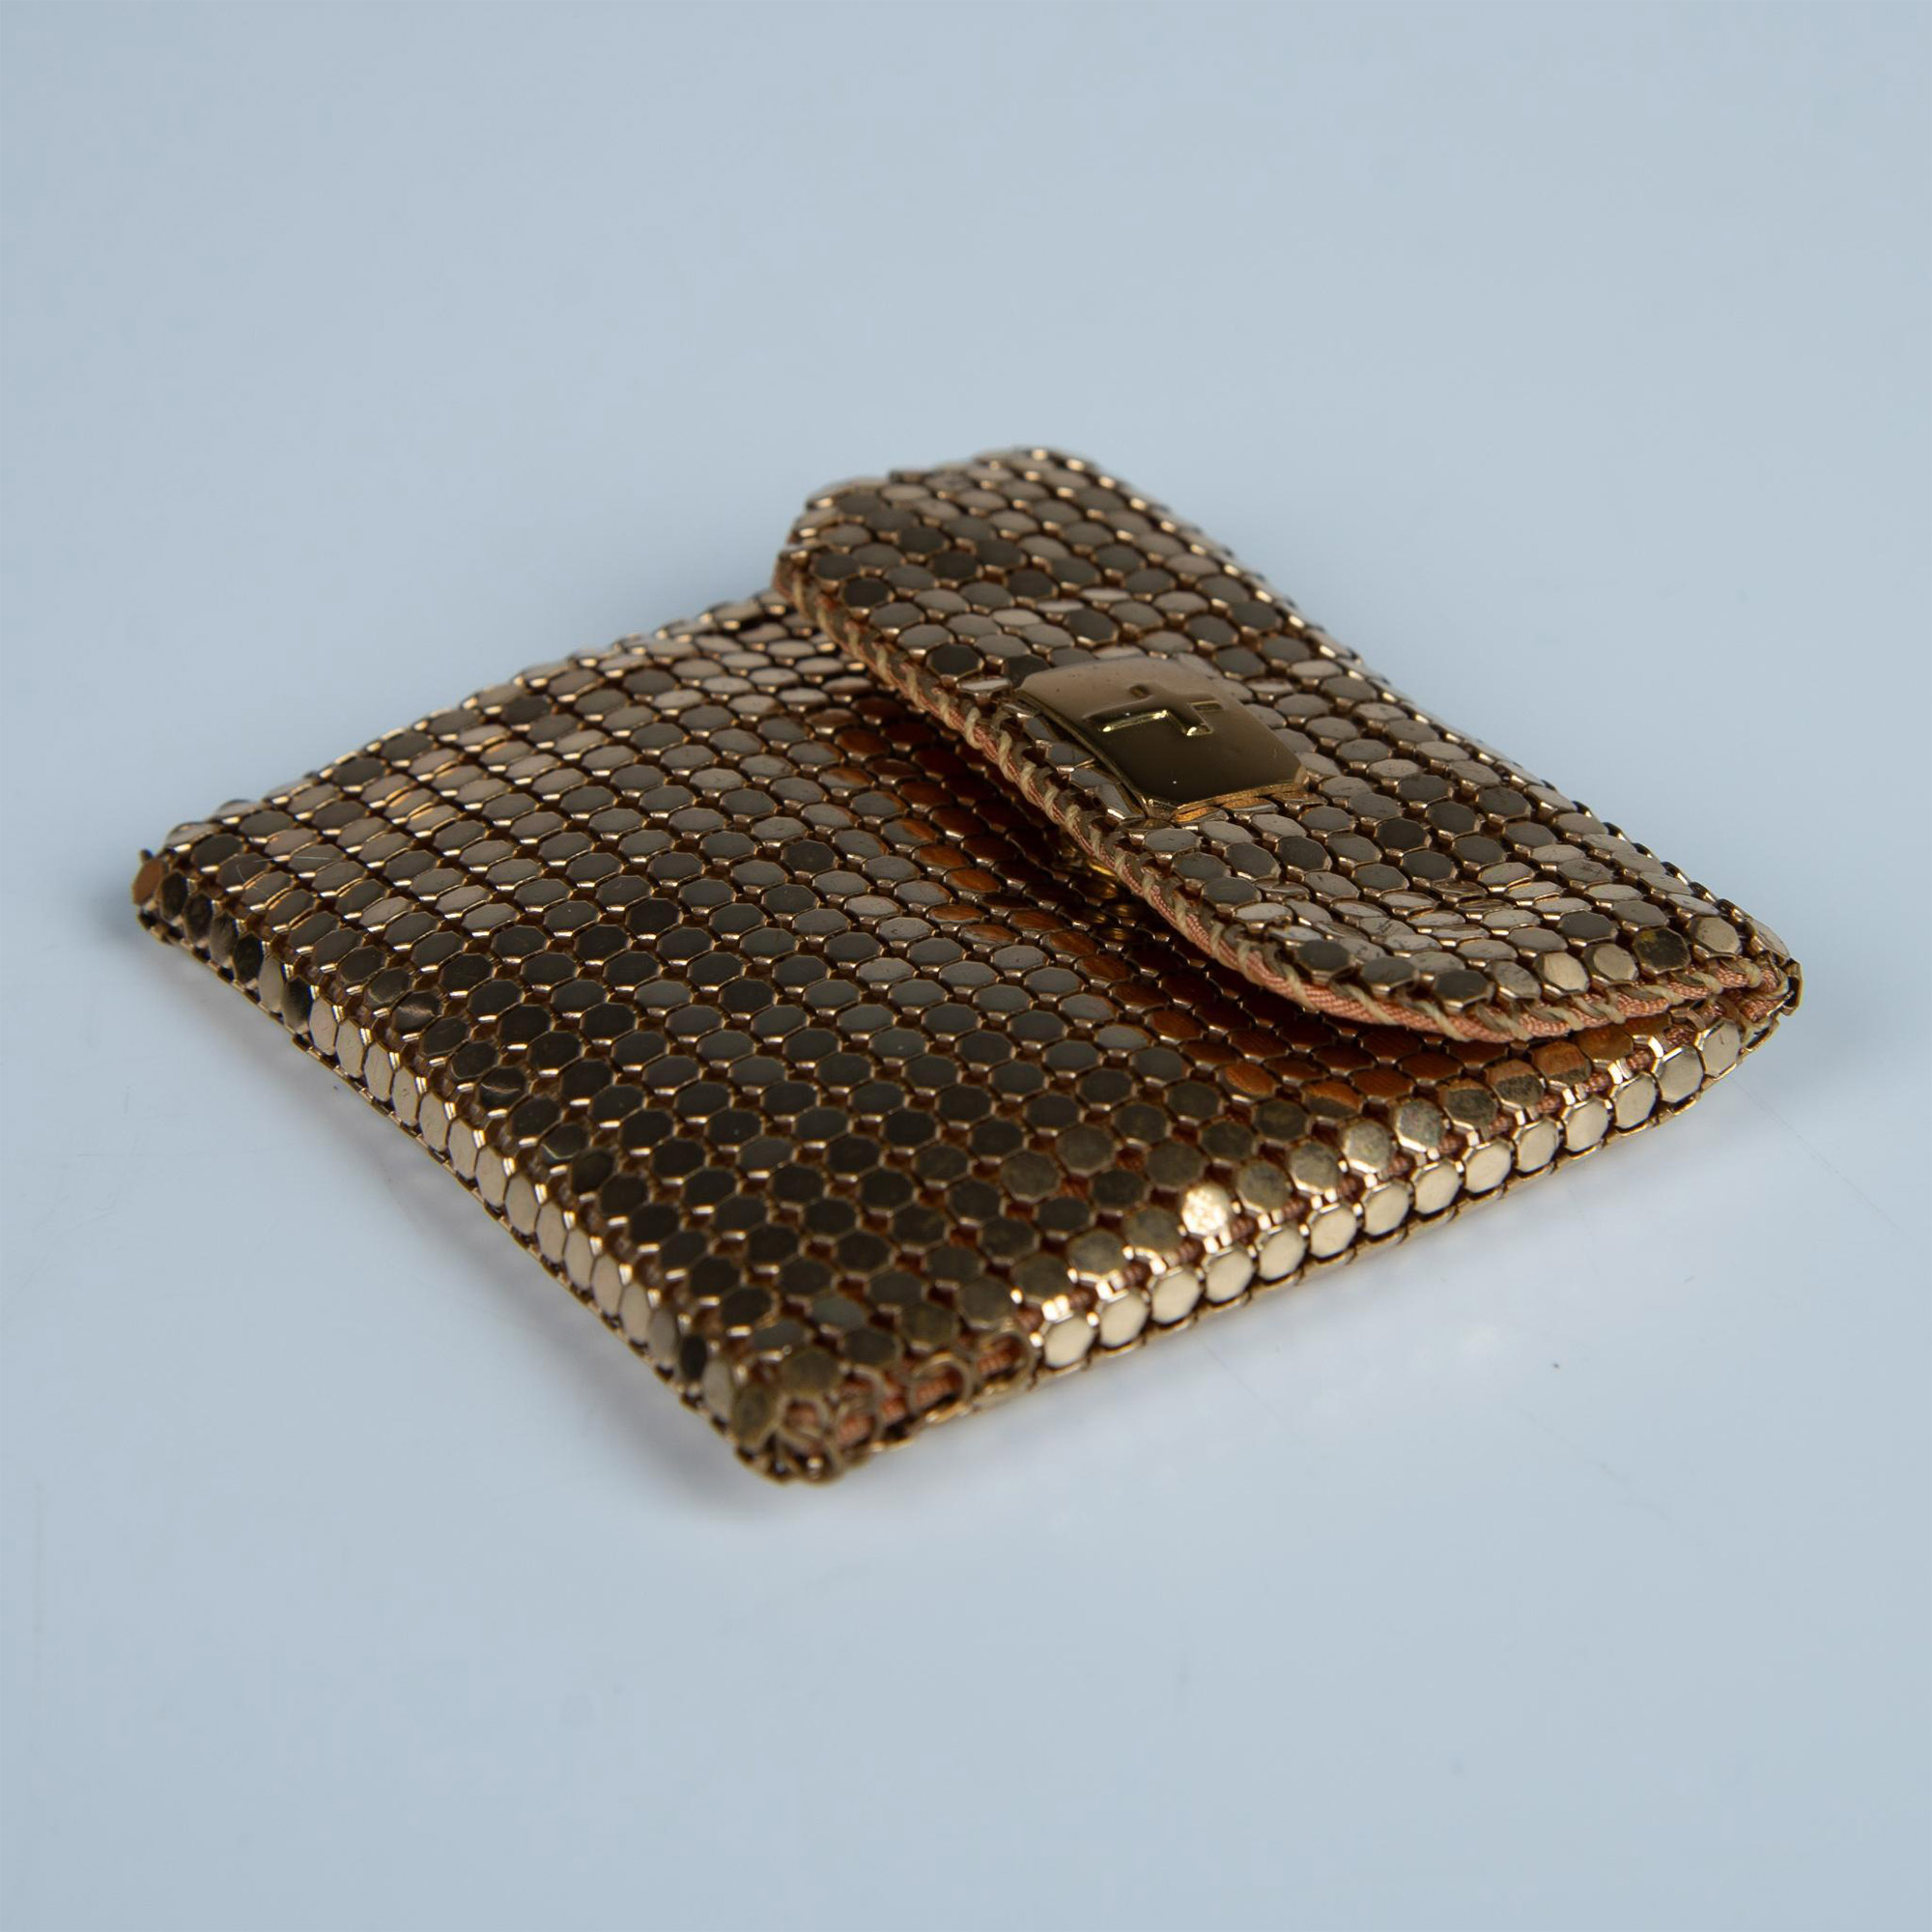 2pc Whiting & Davis Co. Gold Mesh Pouch and Christian Rosary - Image 4 of 4